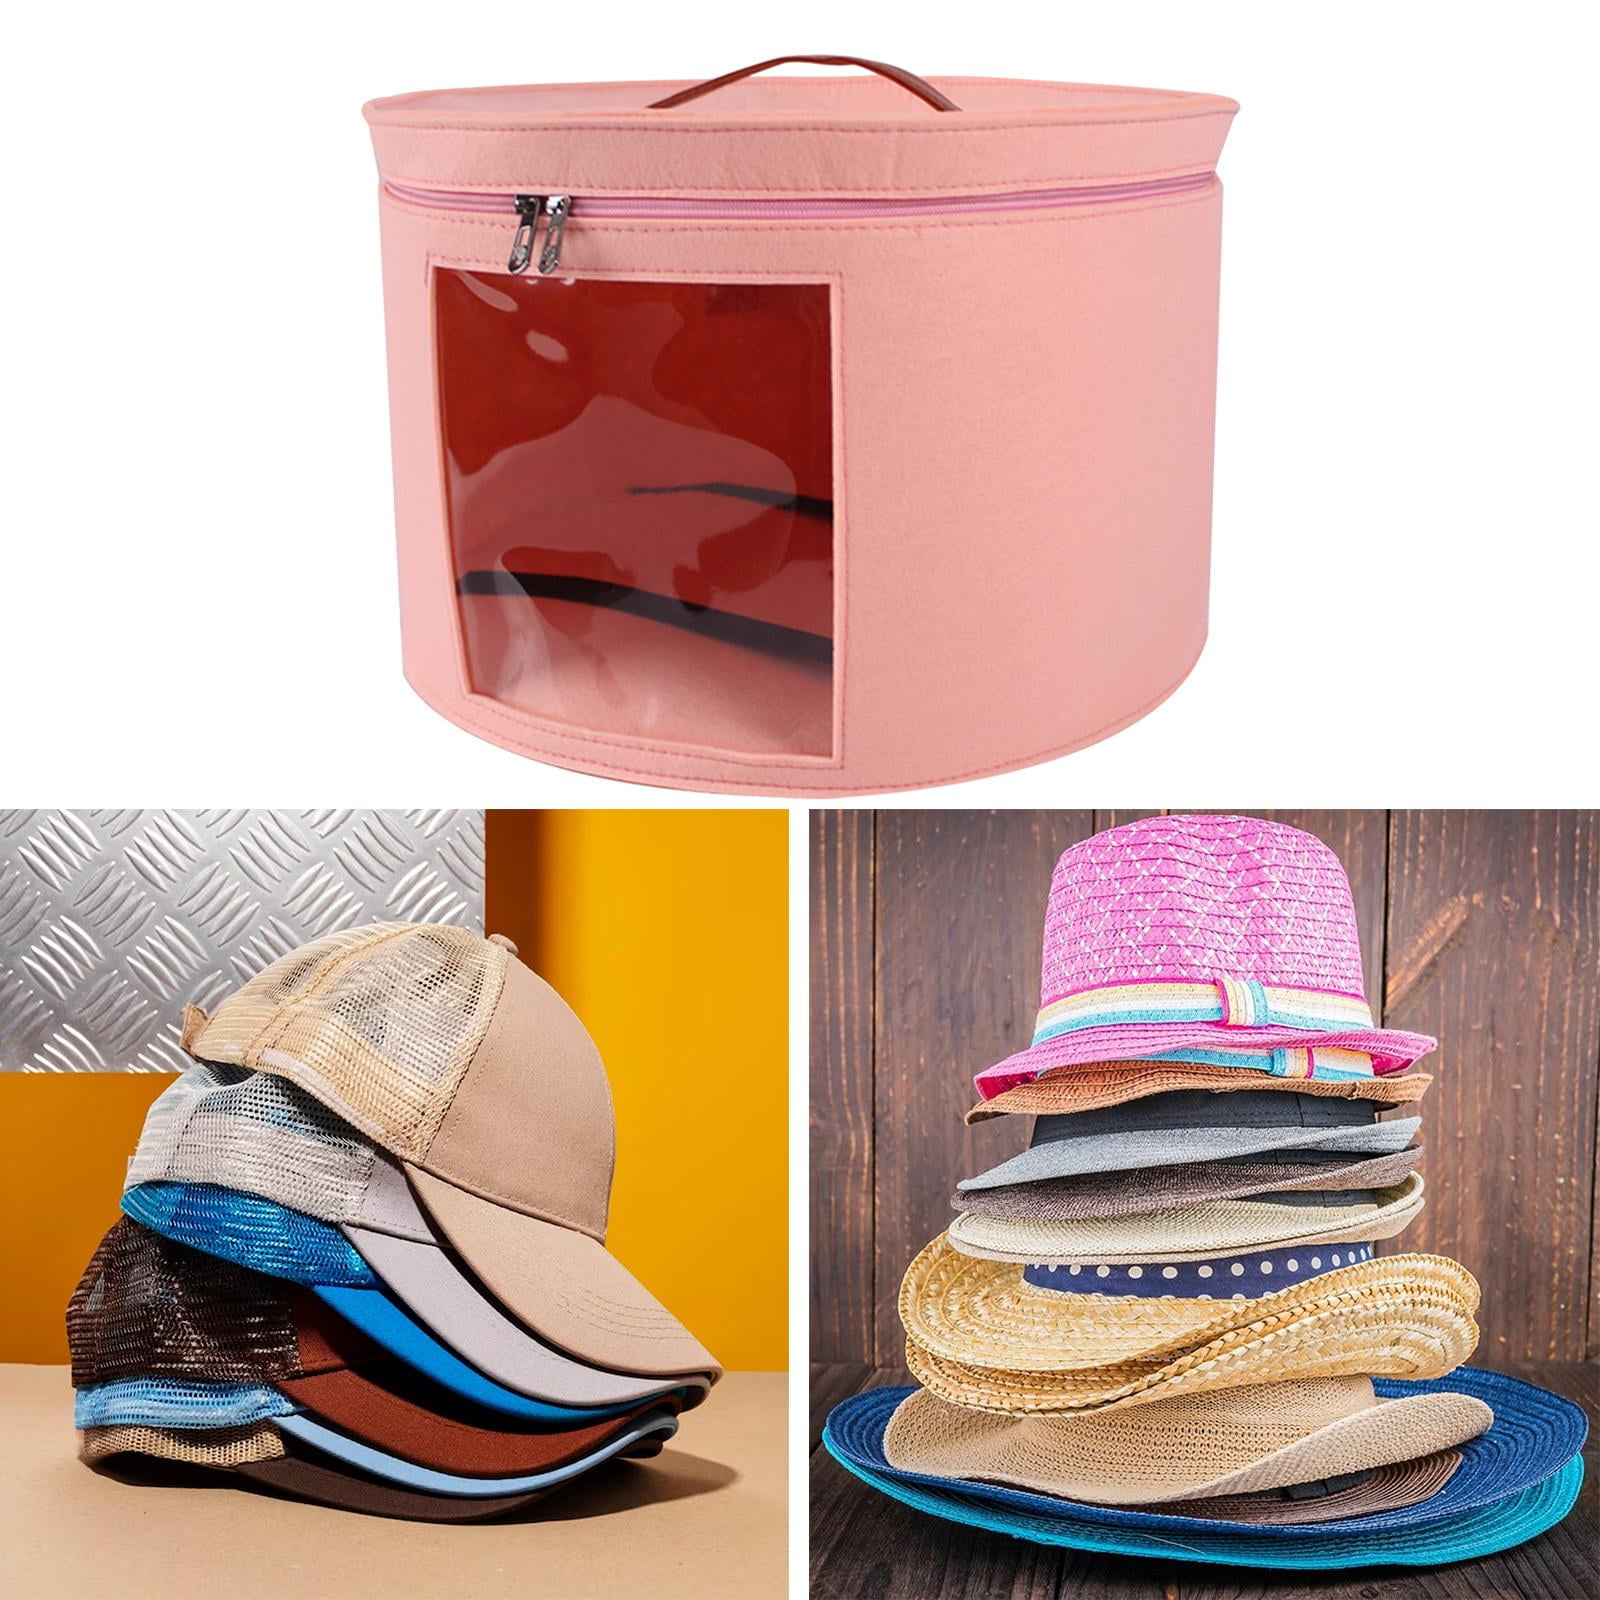  HappiBox Hat Storage Box, Stuffed Animal Toy Storage, Stackable Round Pop-up Container, Travel Hat Boxes for Women & Men, Closet Organizer w Lid